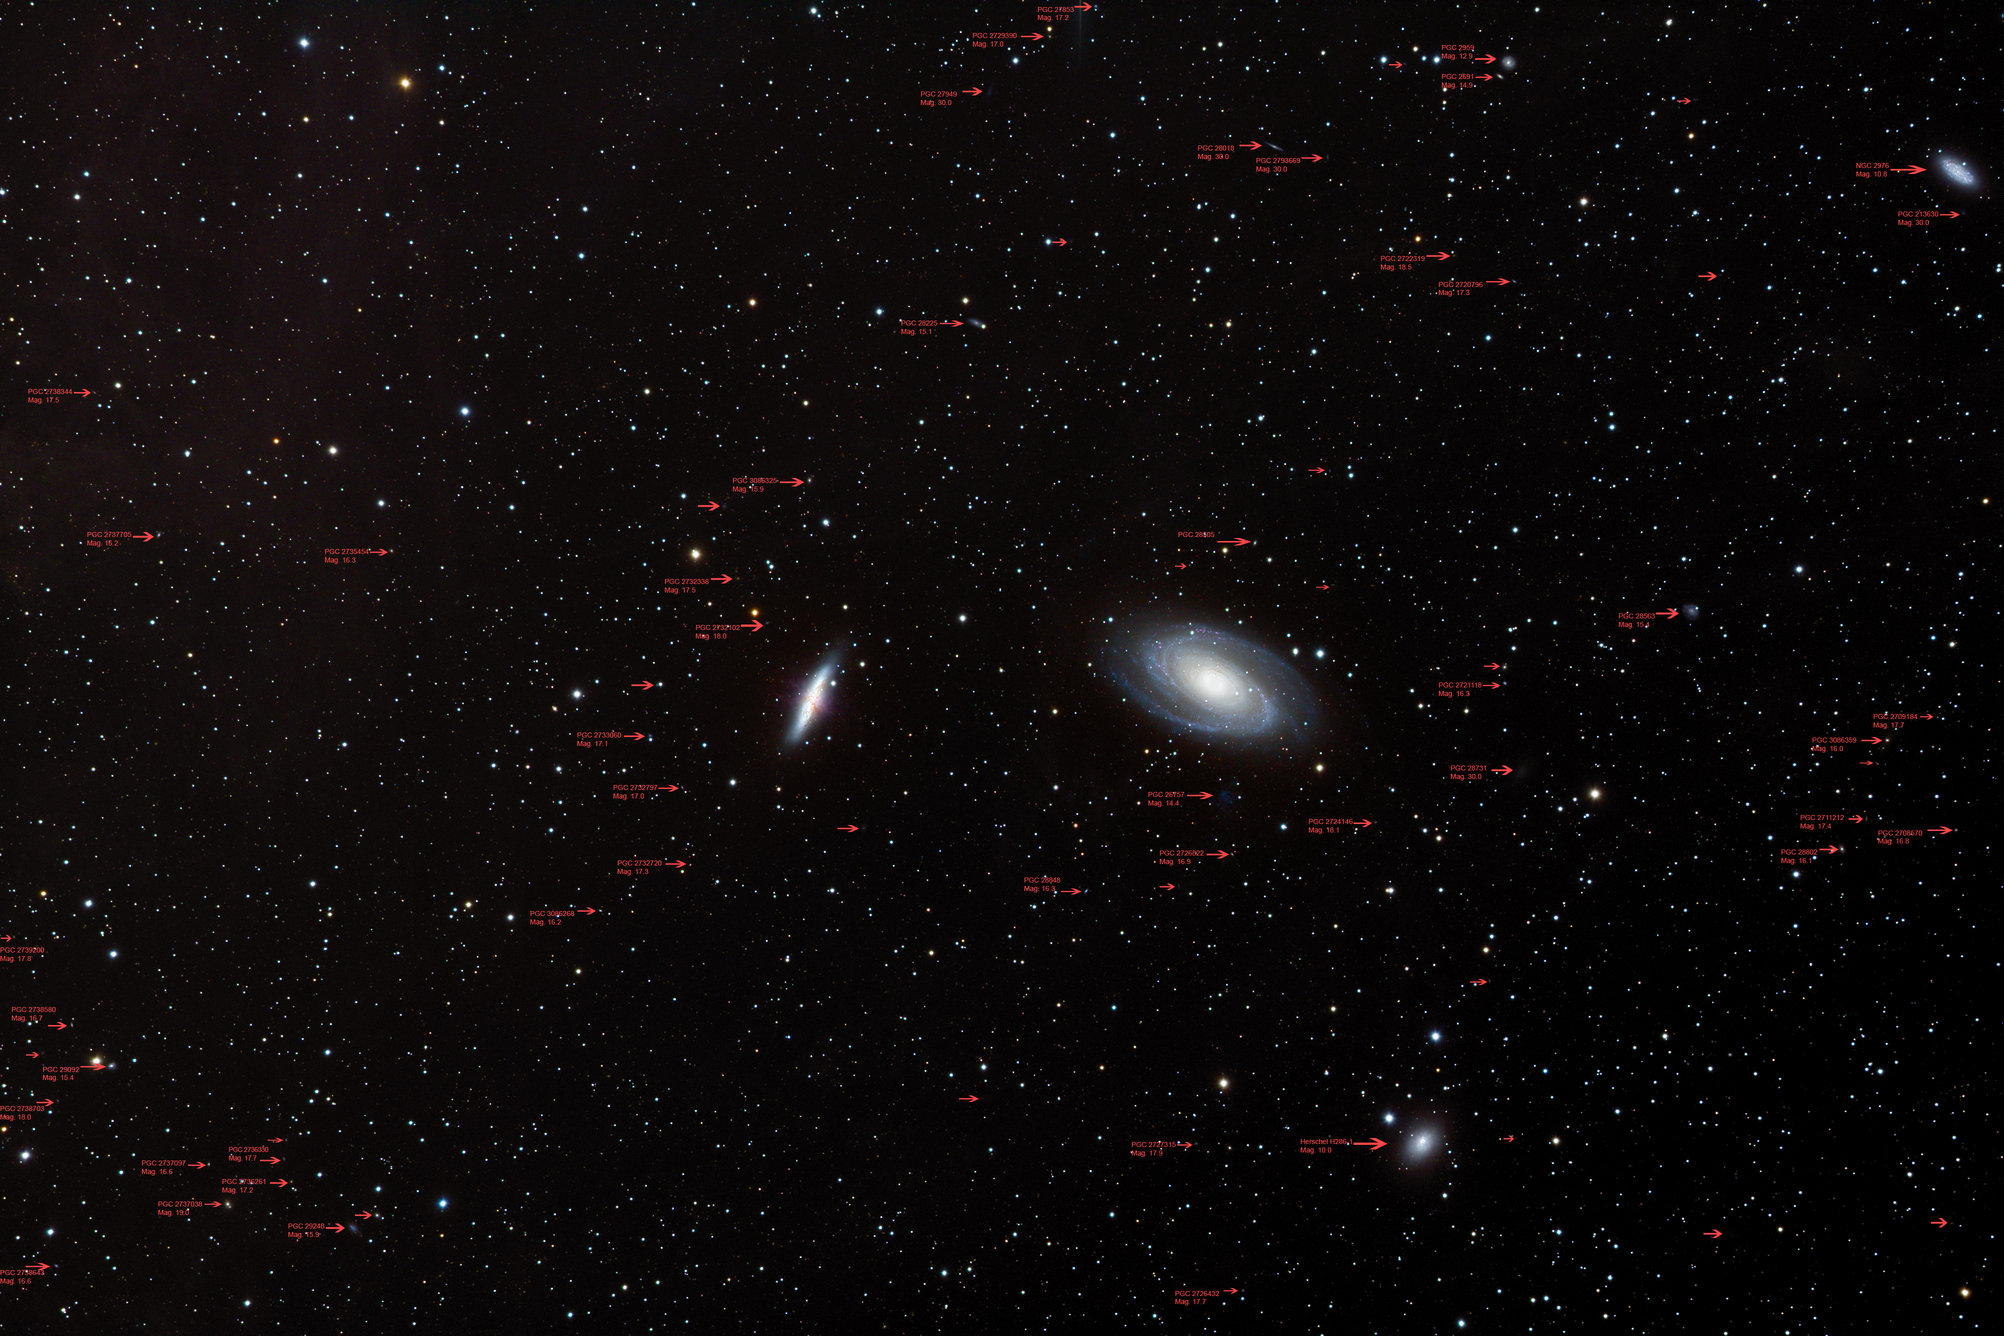 M81M82_annotated